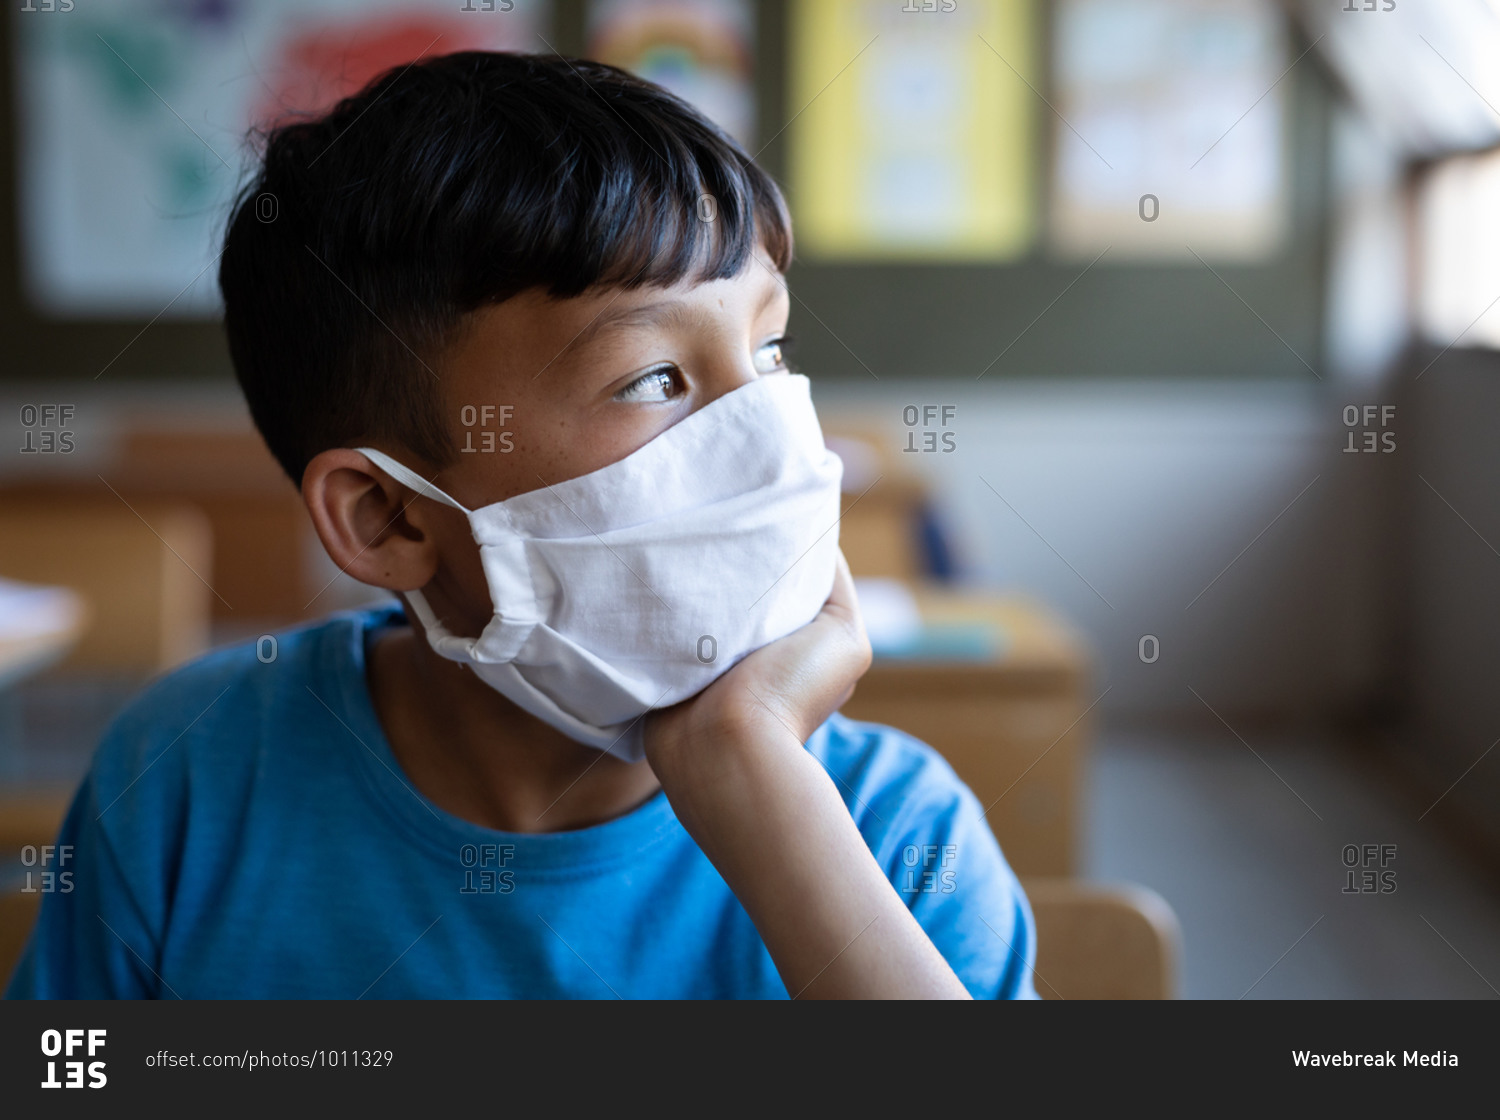 Thoughtful mixed race boy wearing face mask sitting on his desk at school. Primary education social distancing health safety during Covid19 Coronavirus pandemic.